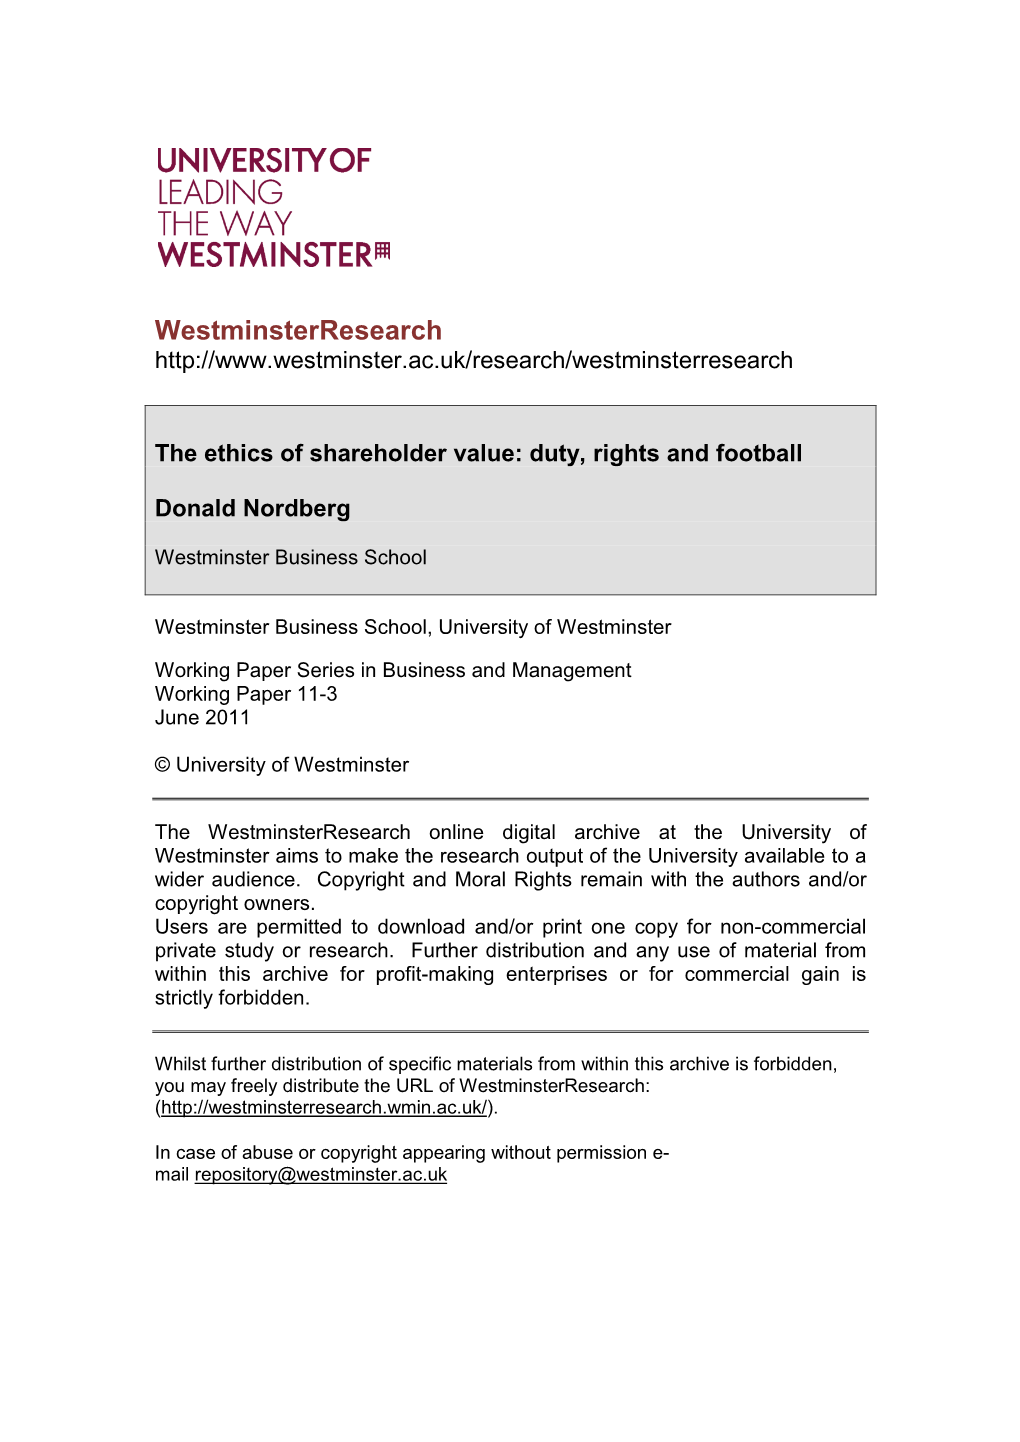 The Ethics of Shareholder Value: Duty, Rights and Football